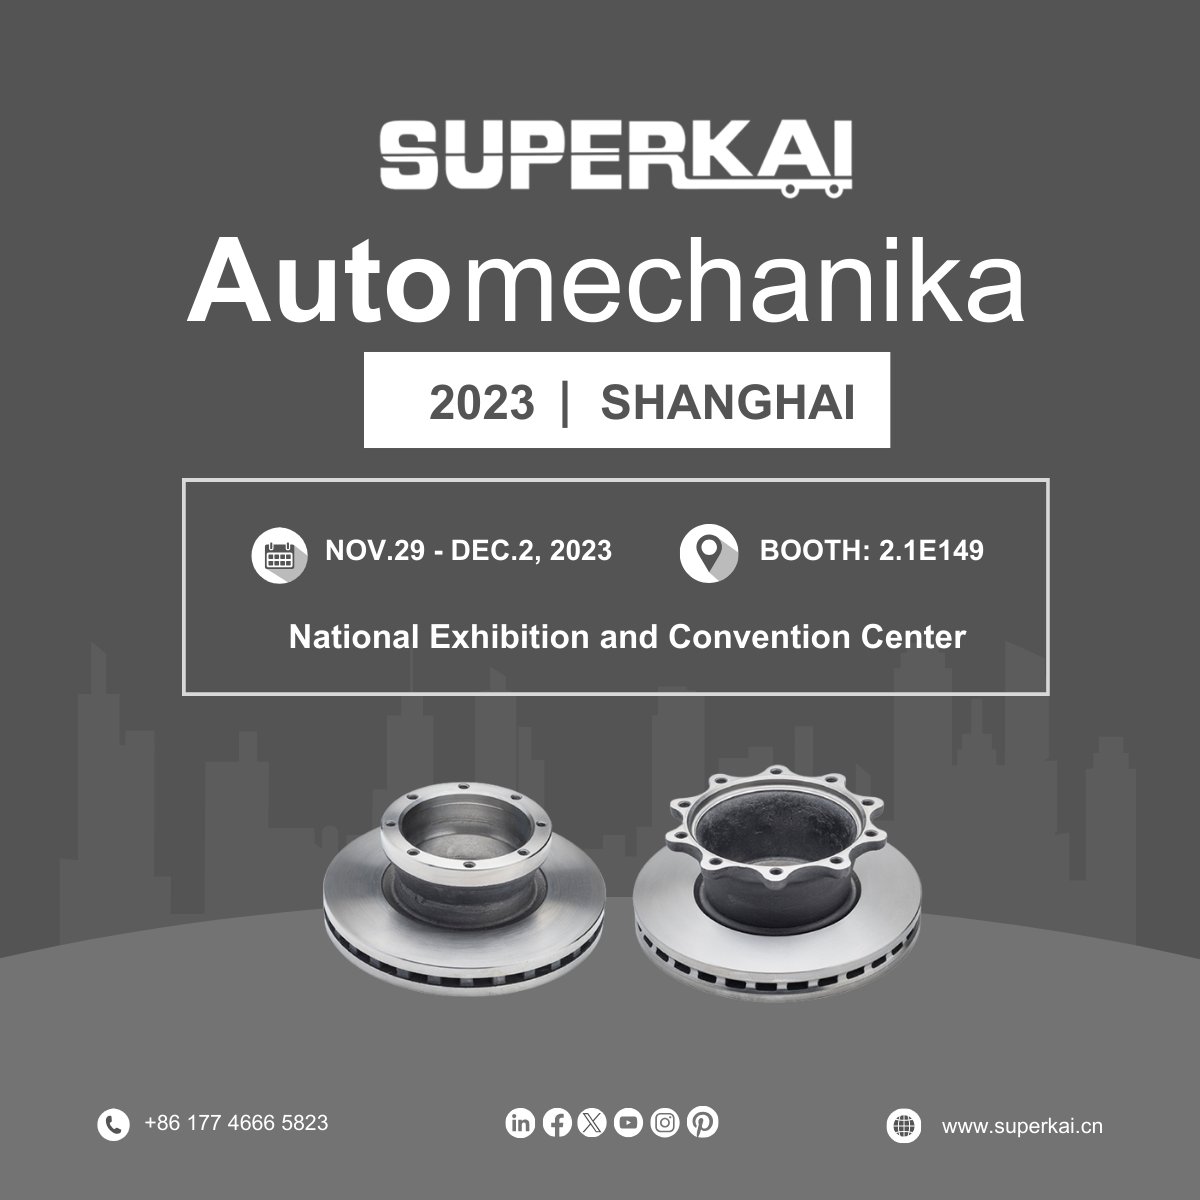 Only one week left until #AutomechanikaShanghai #AMS
Visit SUPERKAI at booth 2.1E149 to see our precision products with full solutions.
We cannot wait to see you.

#AMS #automechanikash #automechanikashanghai #automotive #automechanika2023 #cvpart #truck #trailer #heavyduty